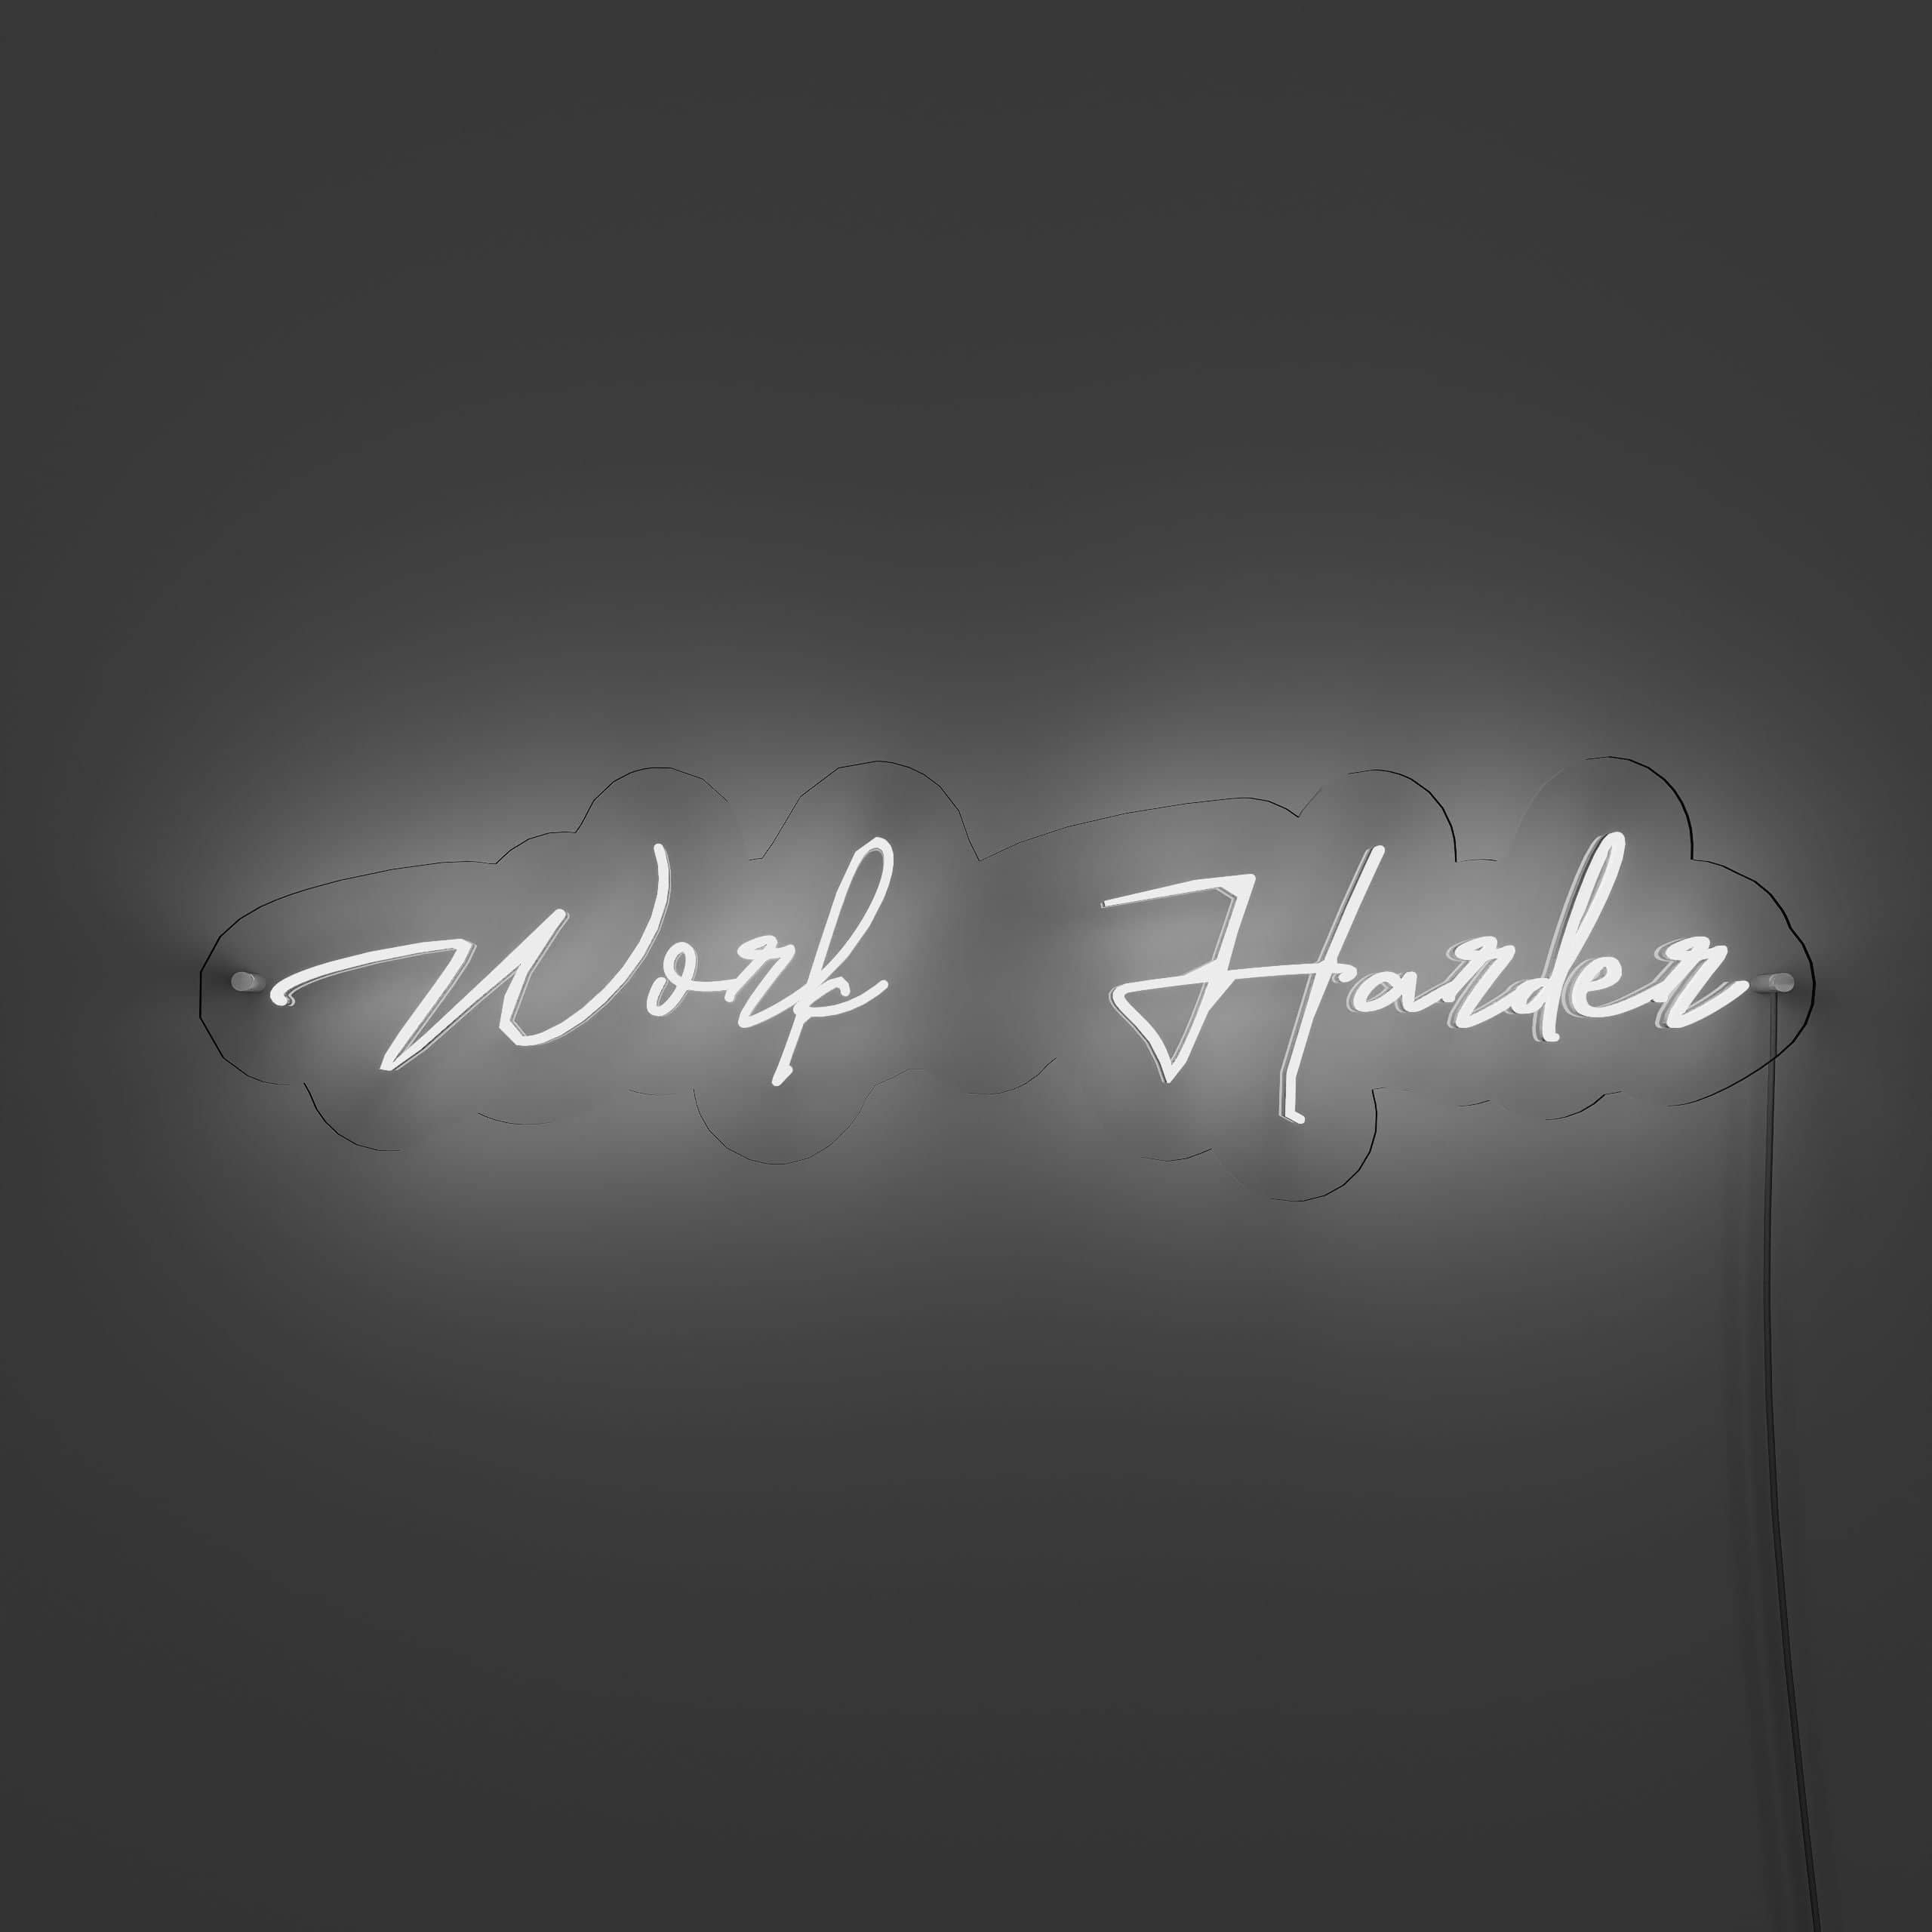 embrace-the-hustle,-work-harder-than-ever-neon-sign-lite